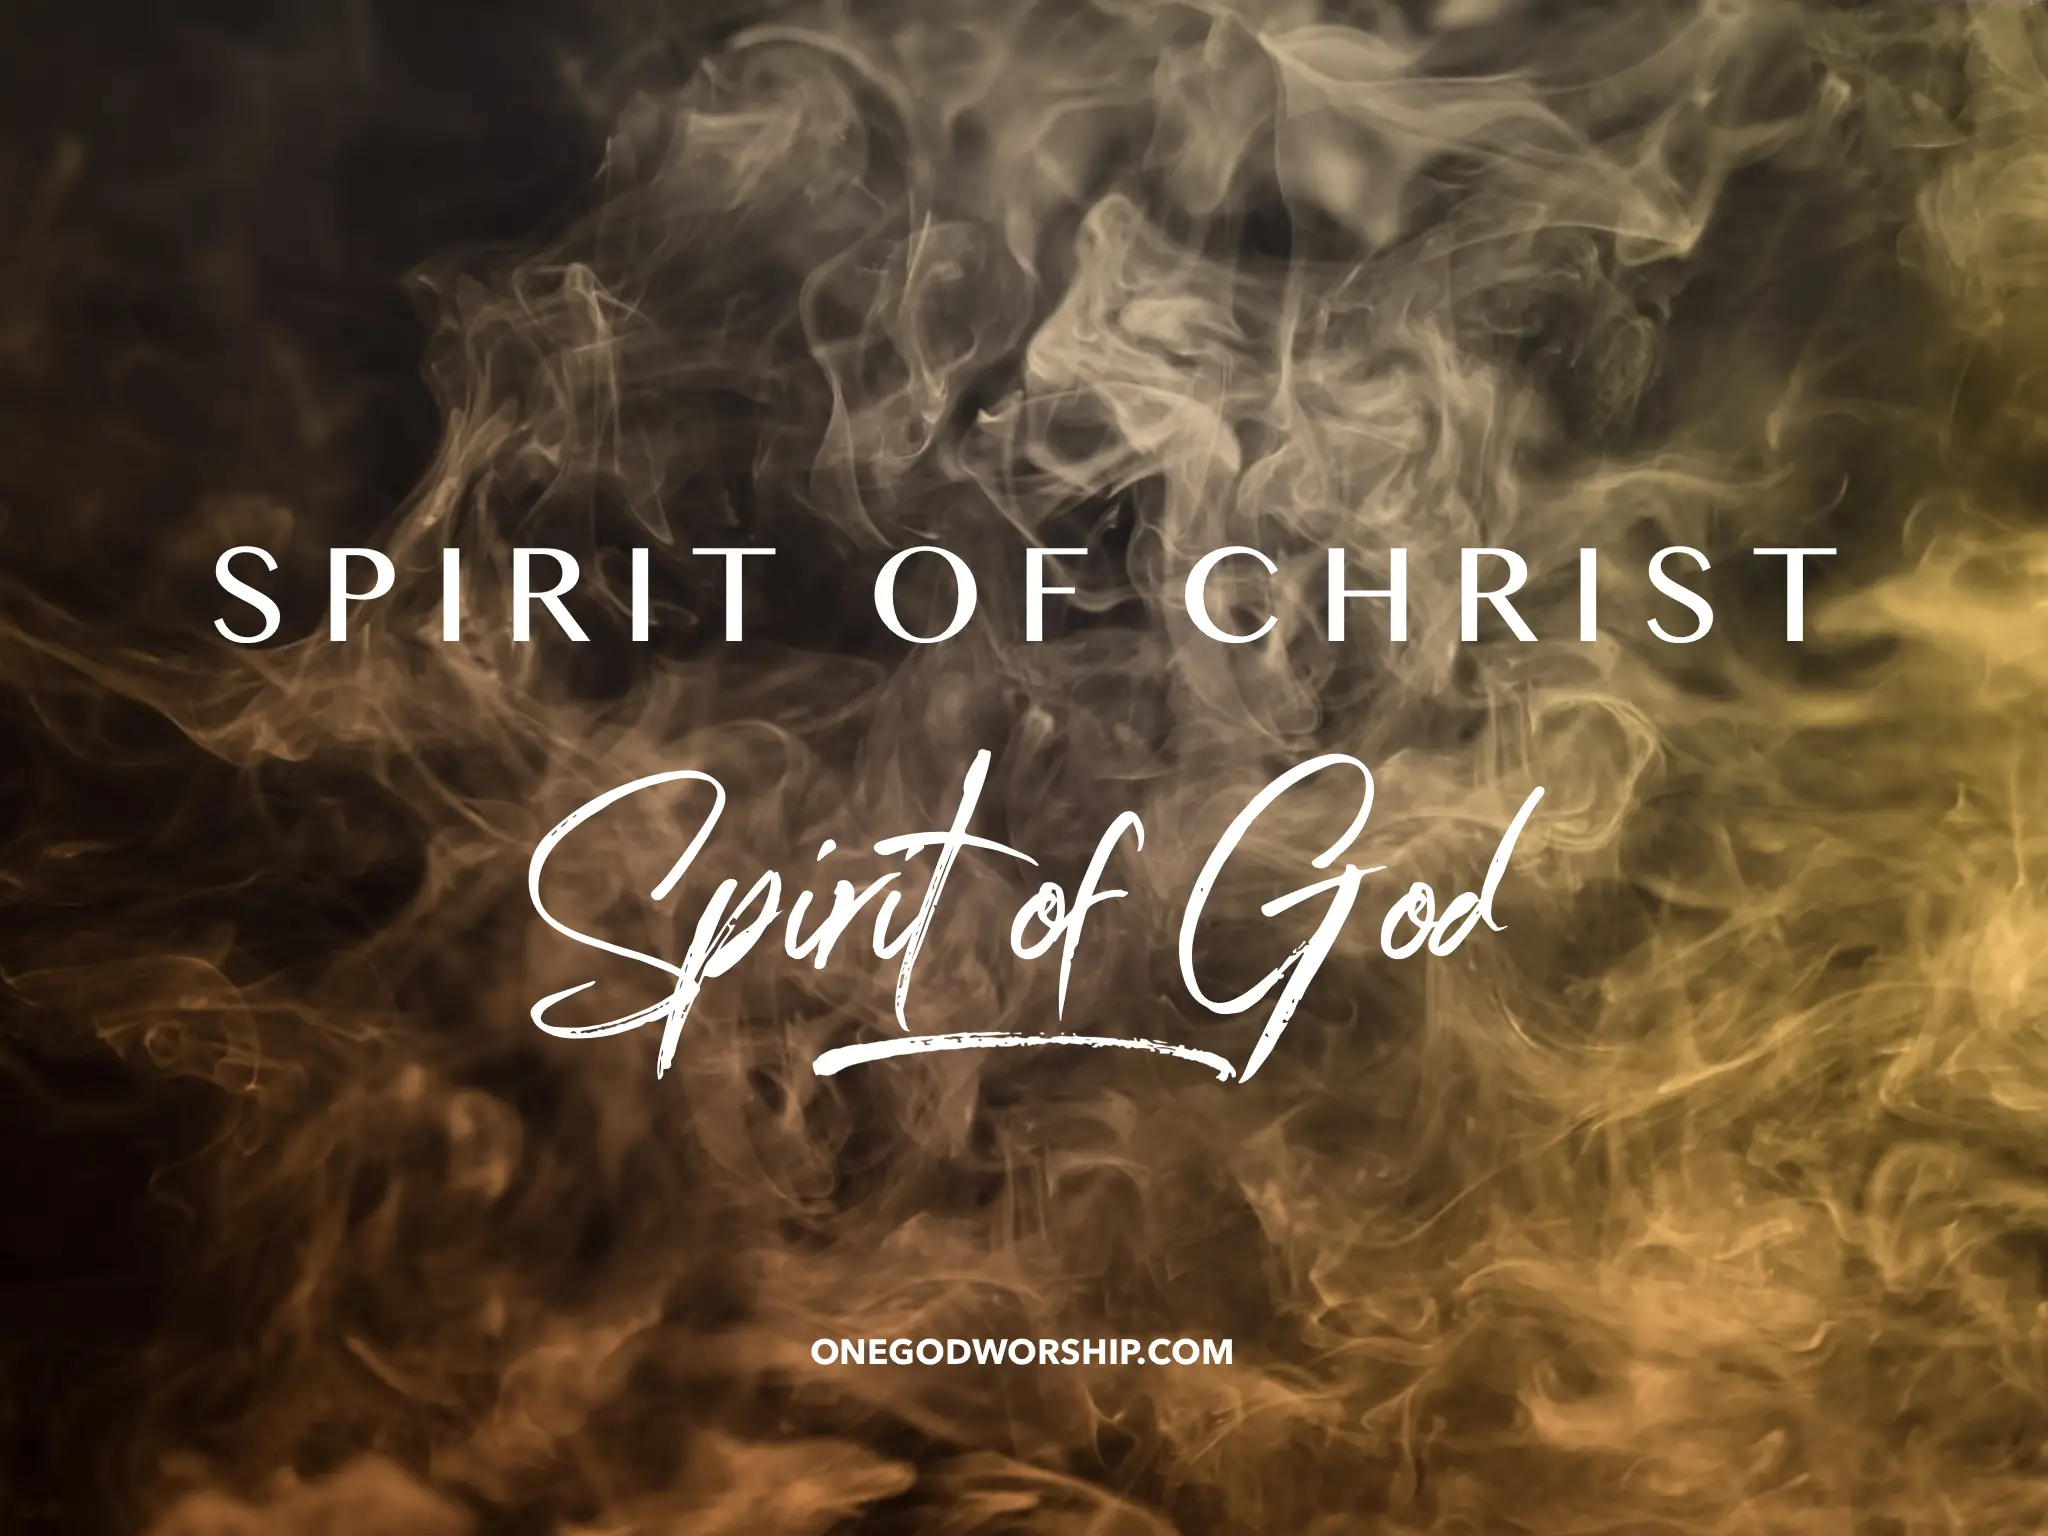 You are currently viewing The Spirit of Christ and The Spirit of God